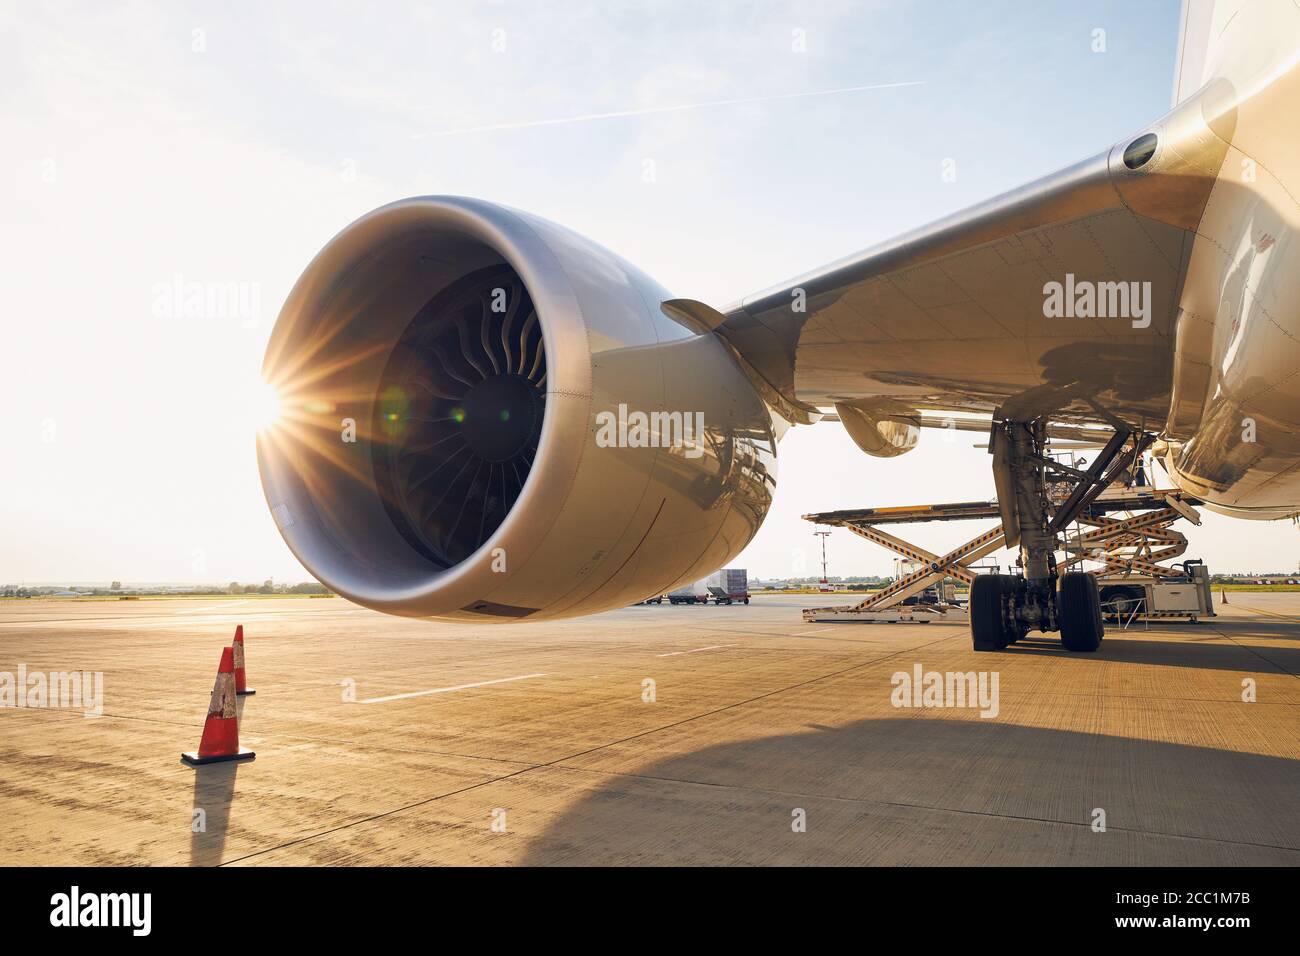 Busy airport at sunset. Large jet engine against loading of cargo containers to airplane. Stock Photo